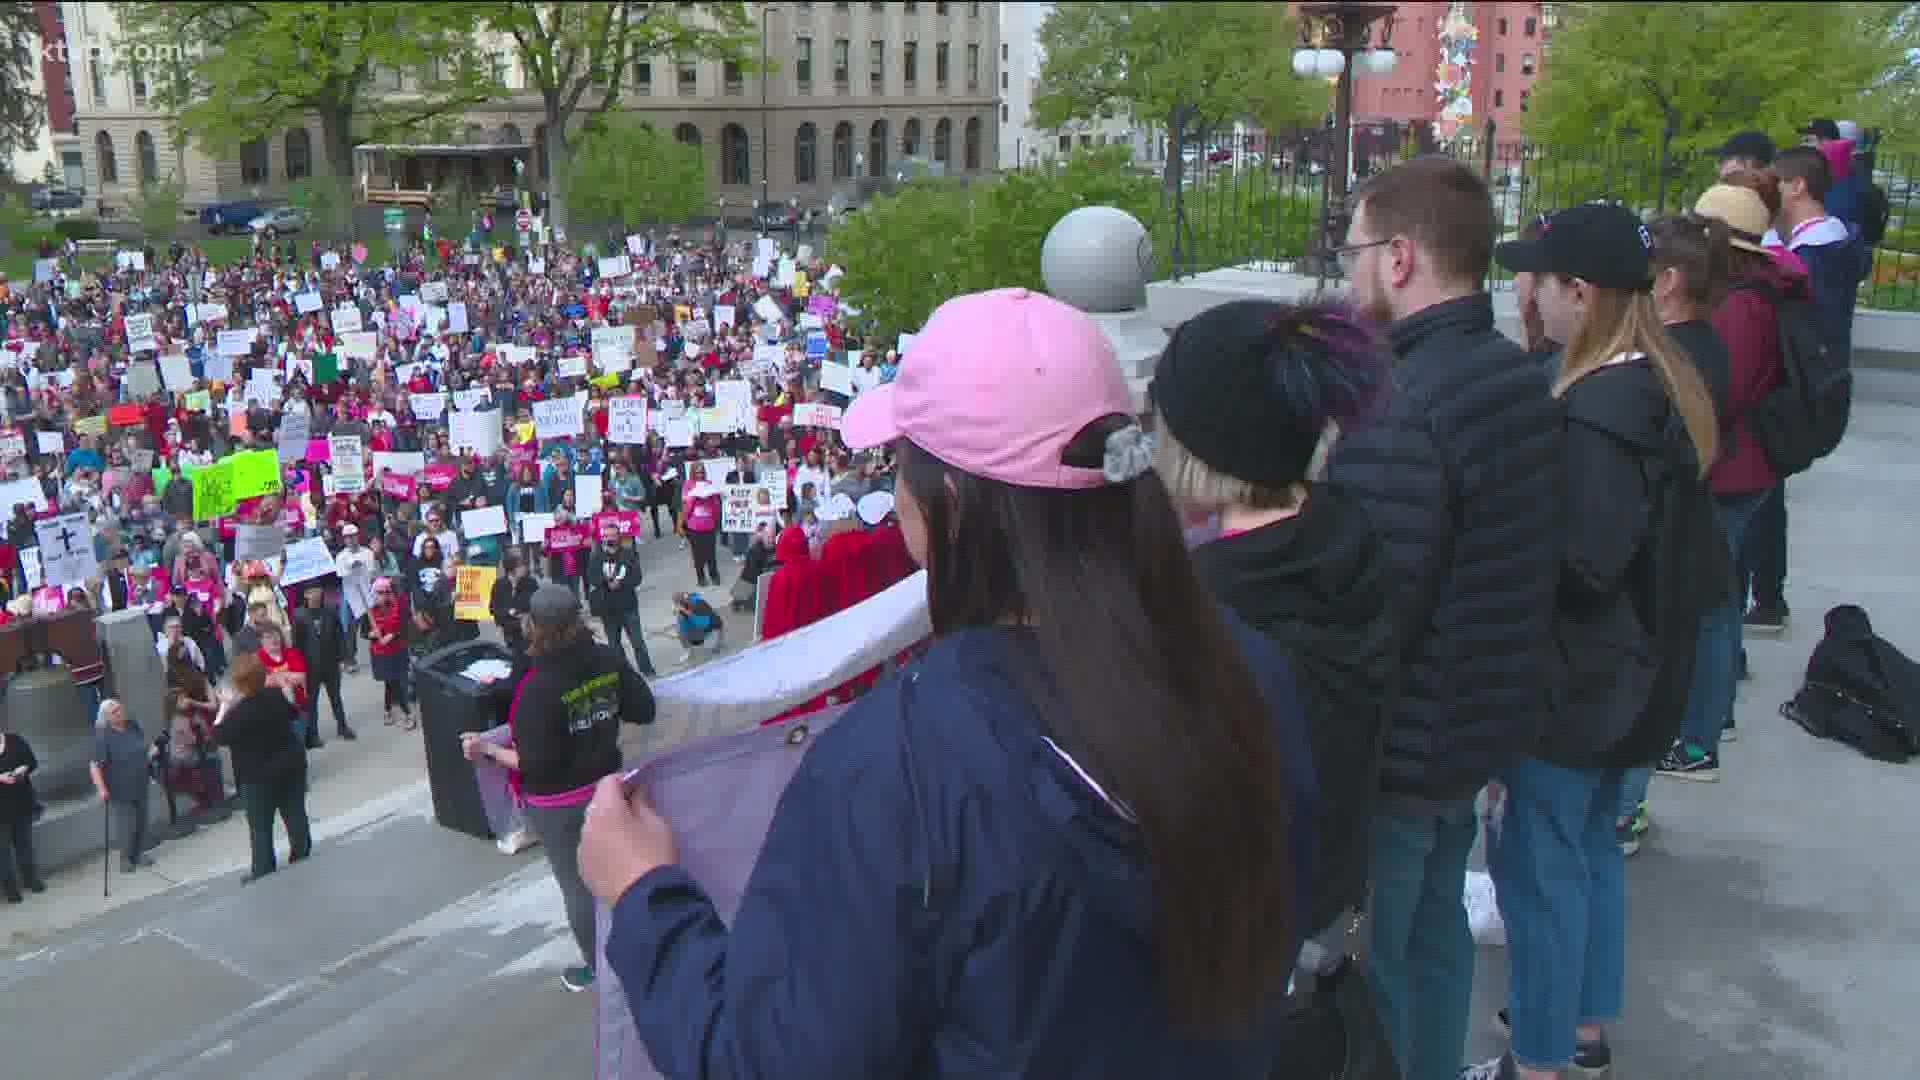 Officers with the Boise Police Department arrested two people at demonstrations Saturday, including an organizer of one of the abortion rights rallies.